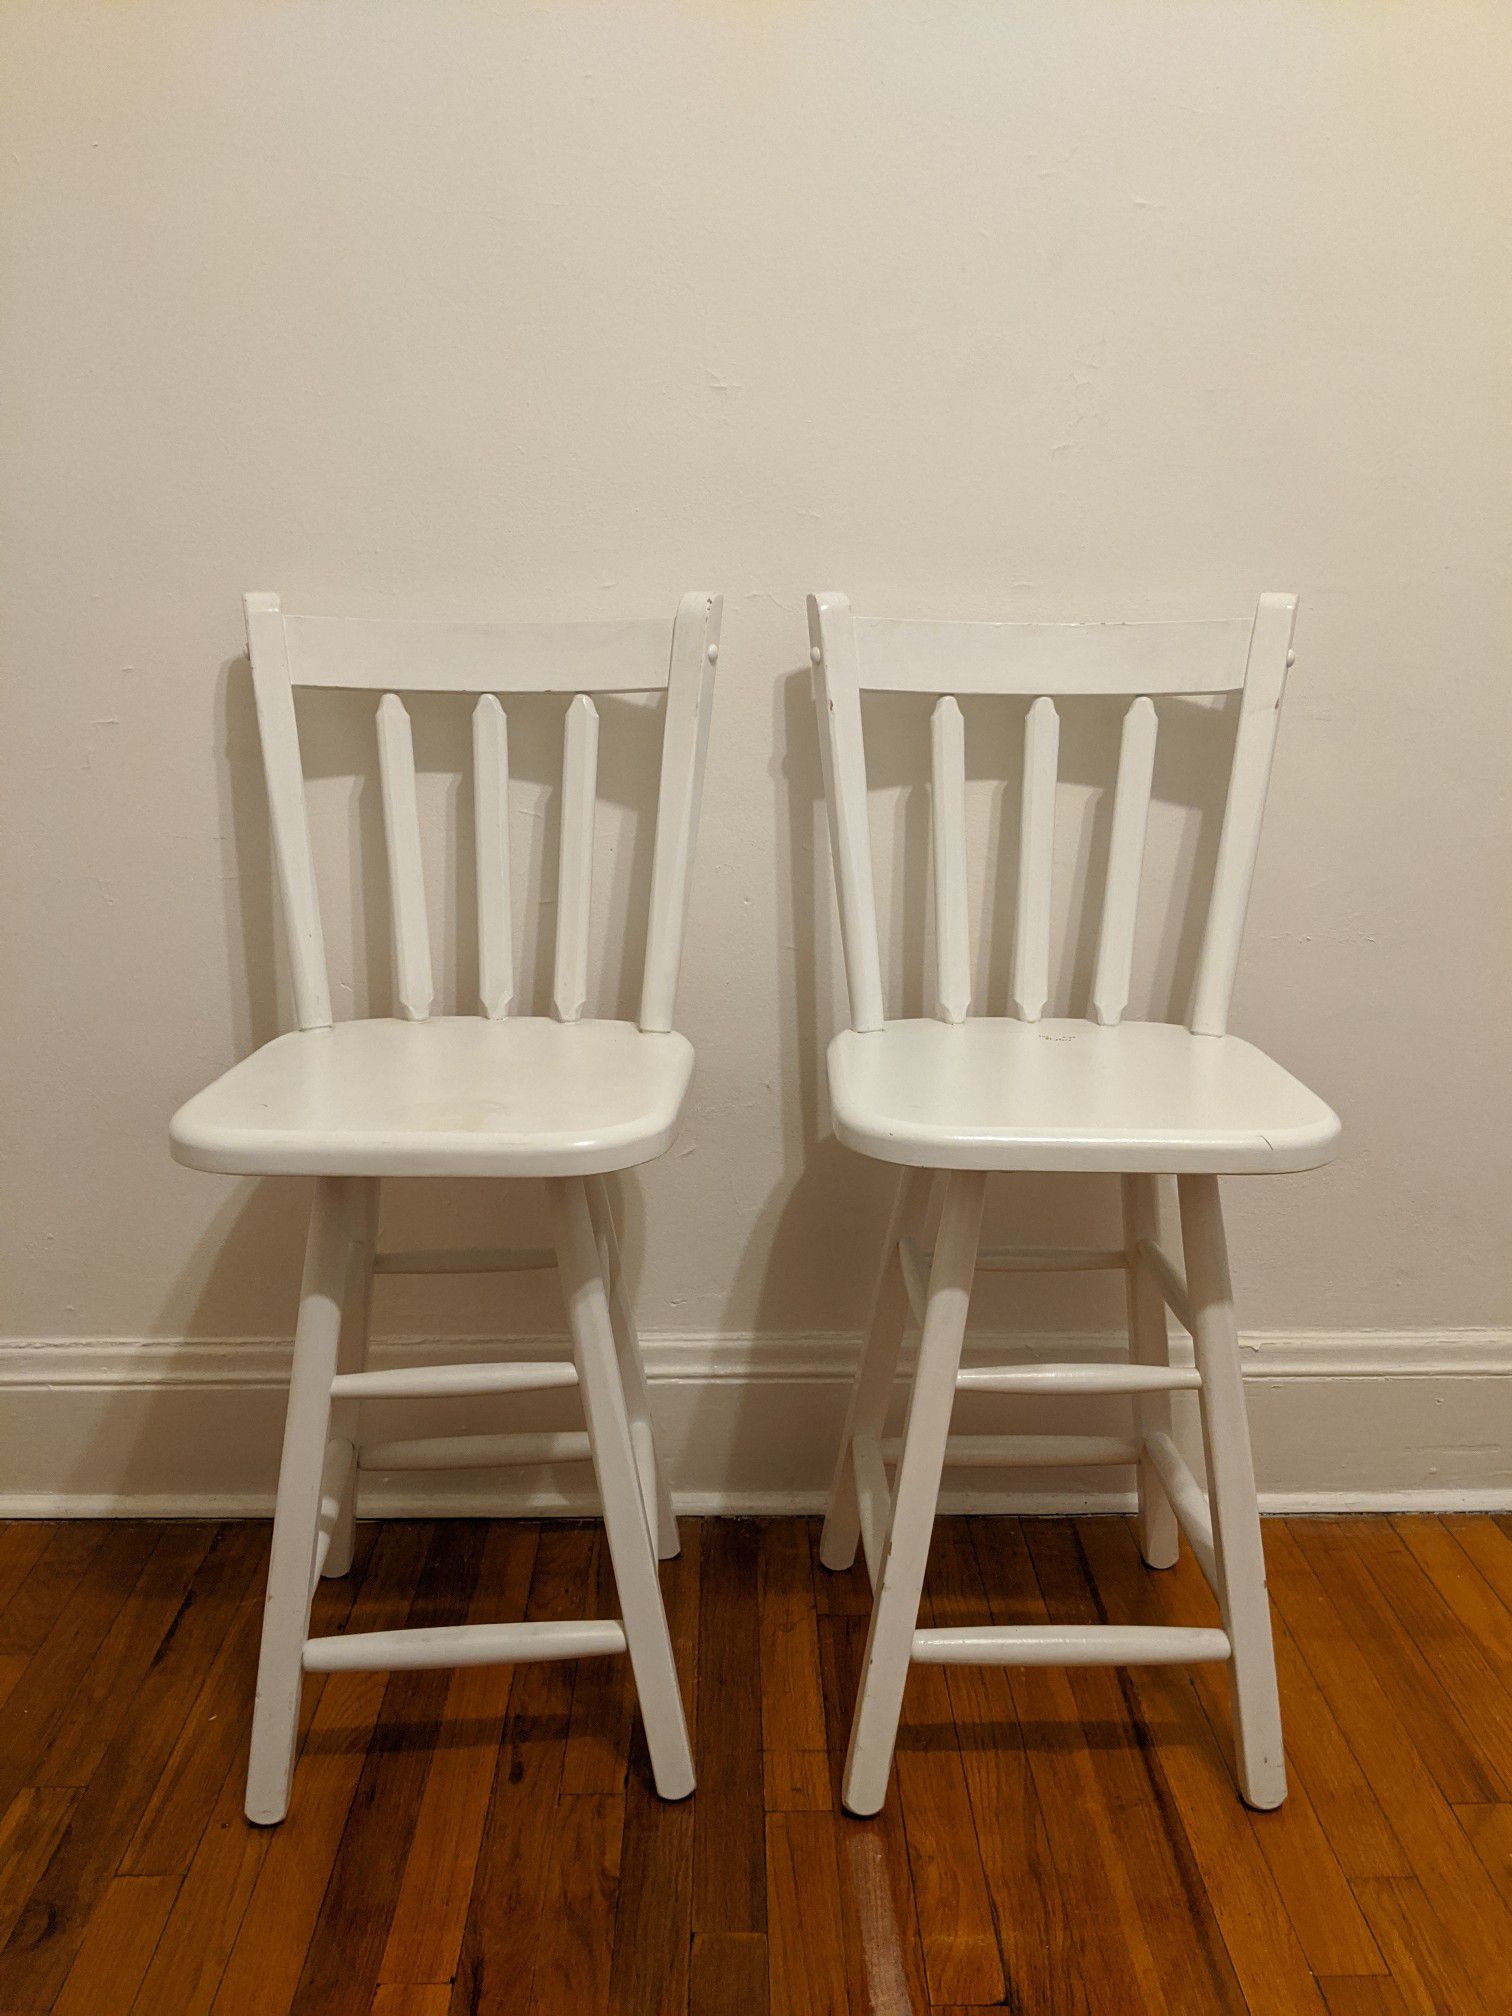 Two beautiful white wooden chairs!